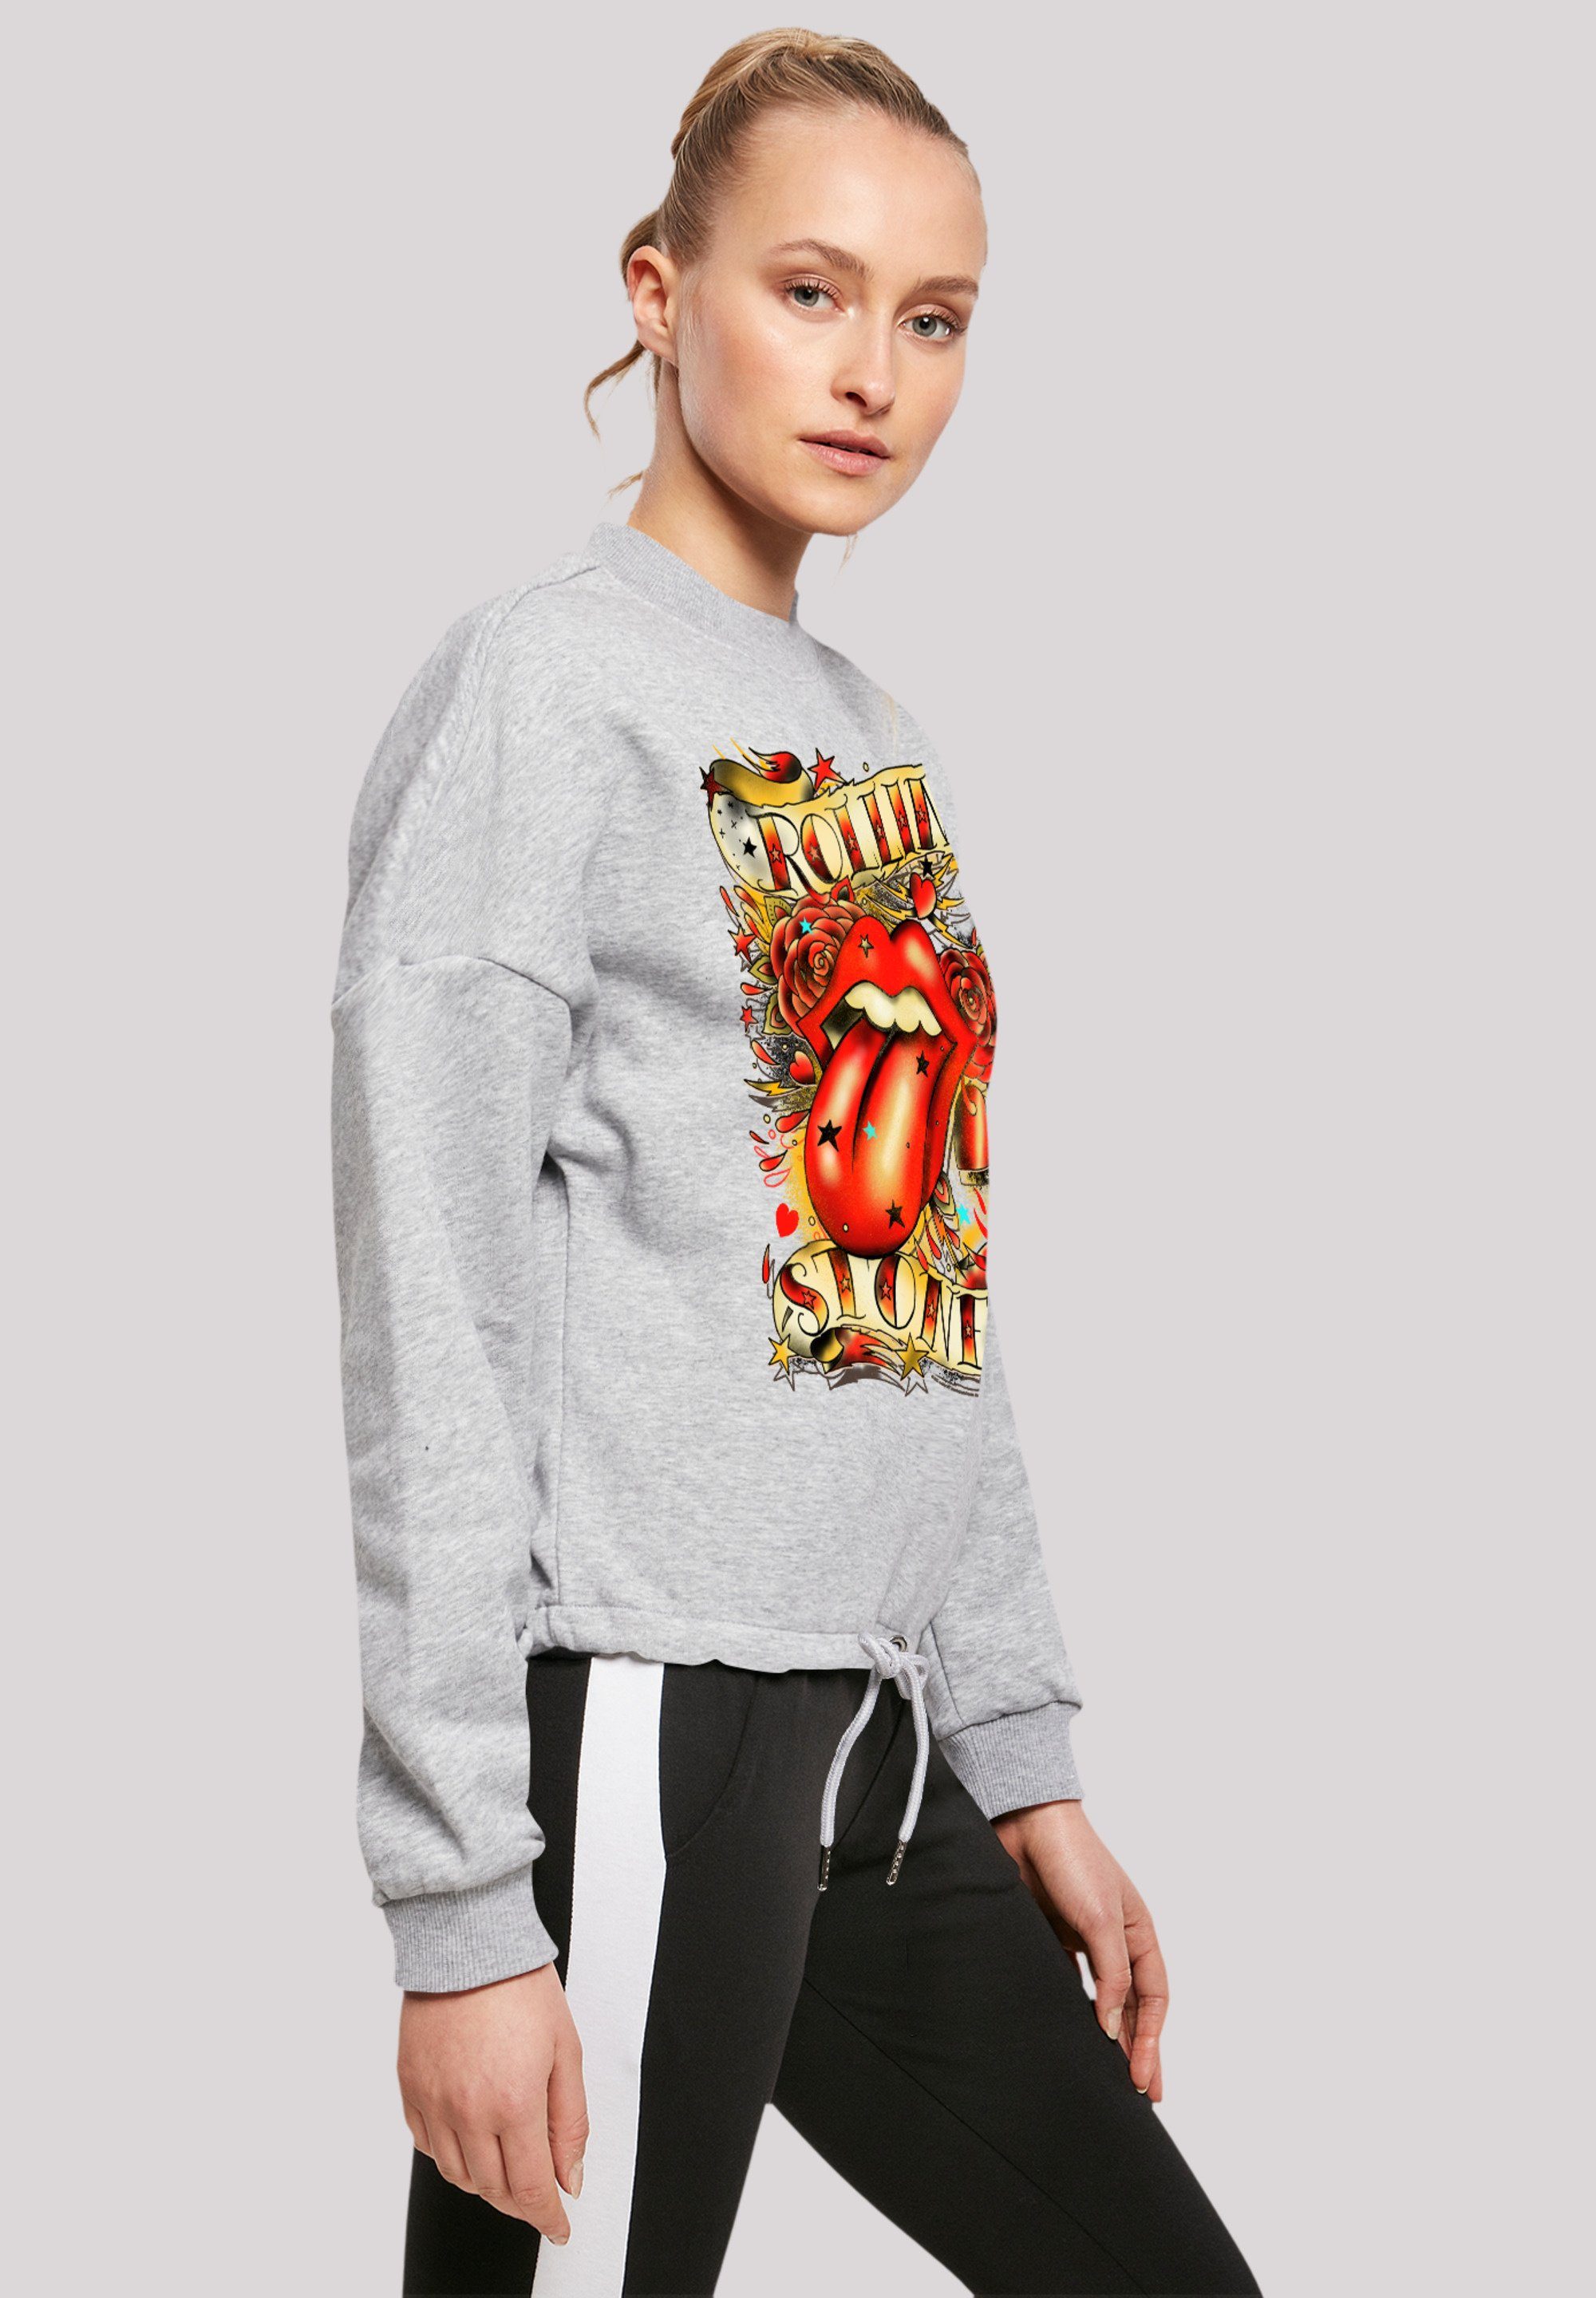 Sweatshirt F4NT4STIC Stars Rolling The heather Musik, Logo Band, Stones grey Tongue And